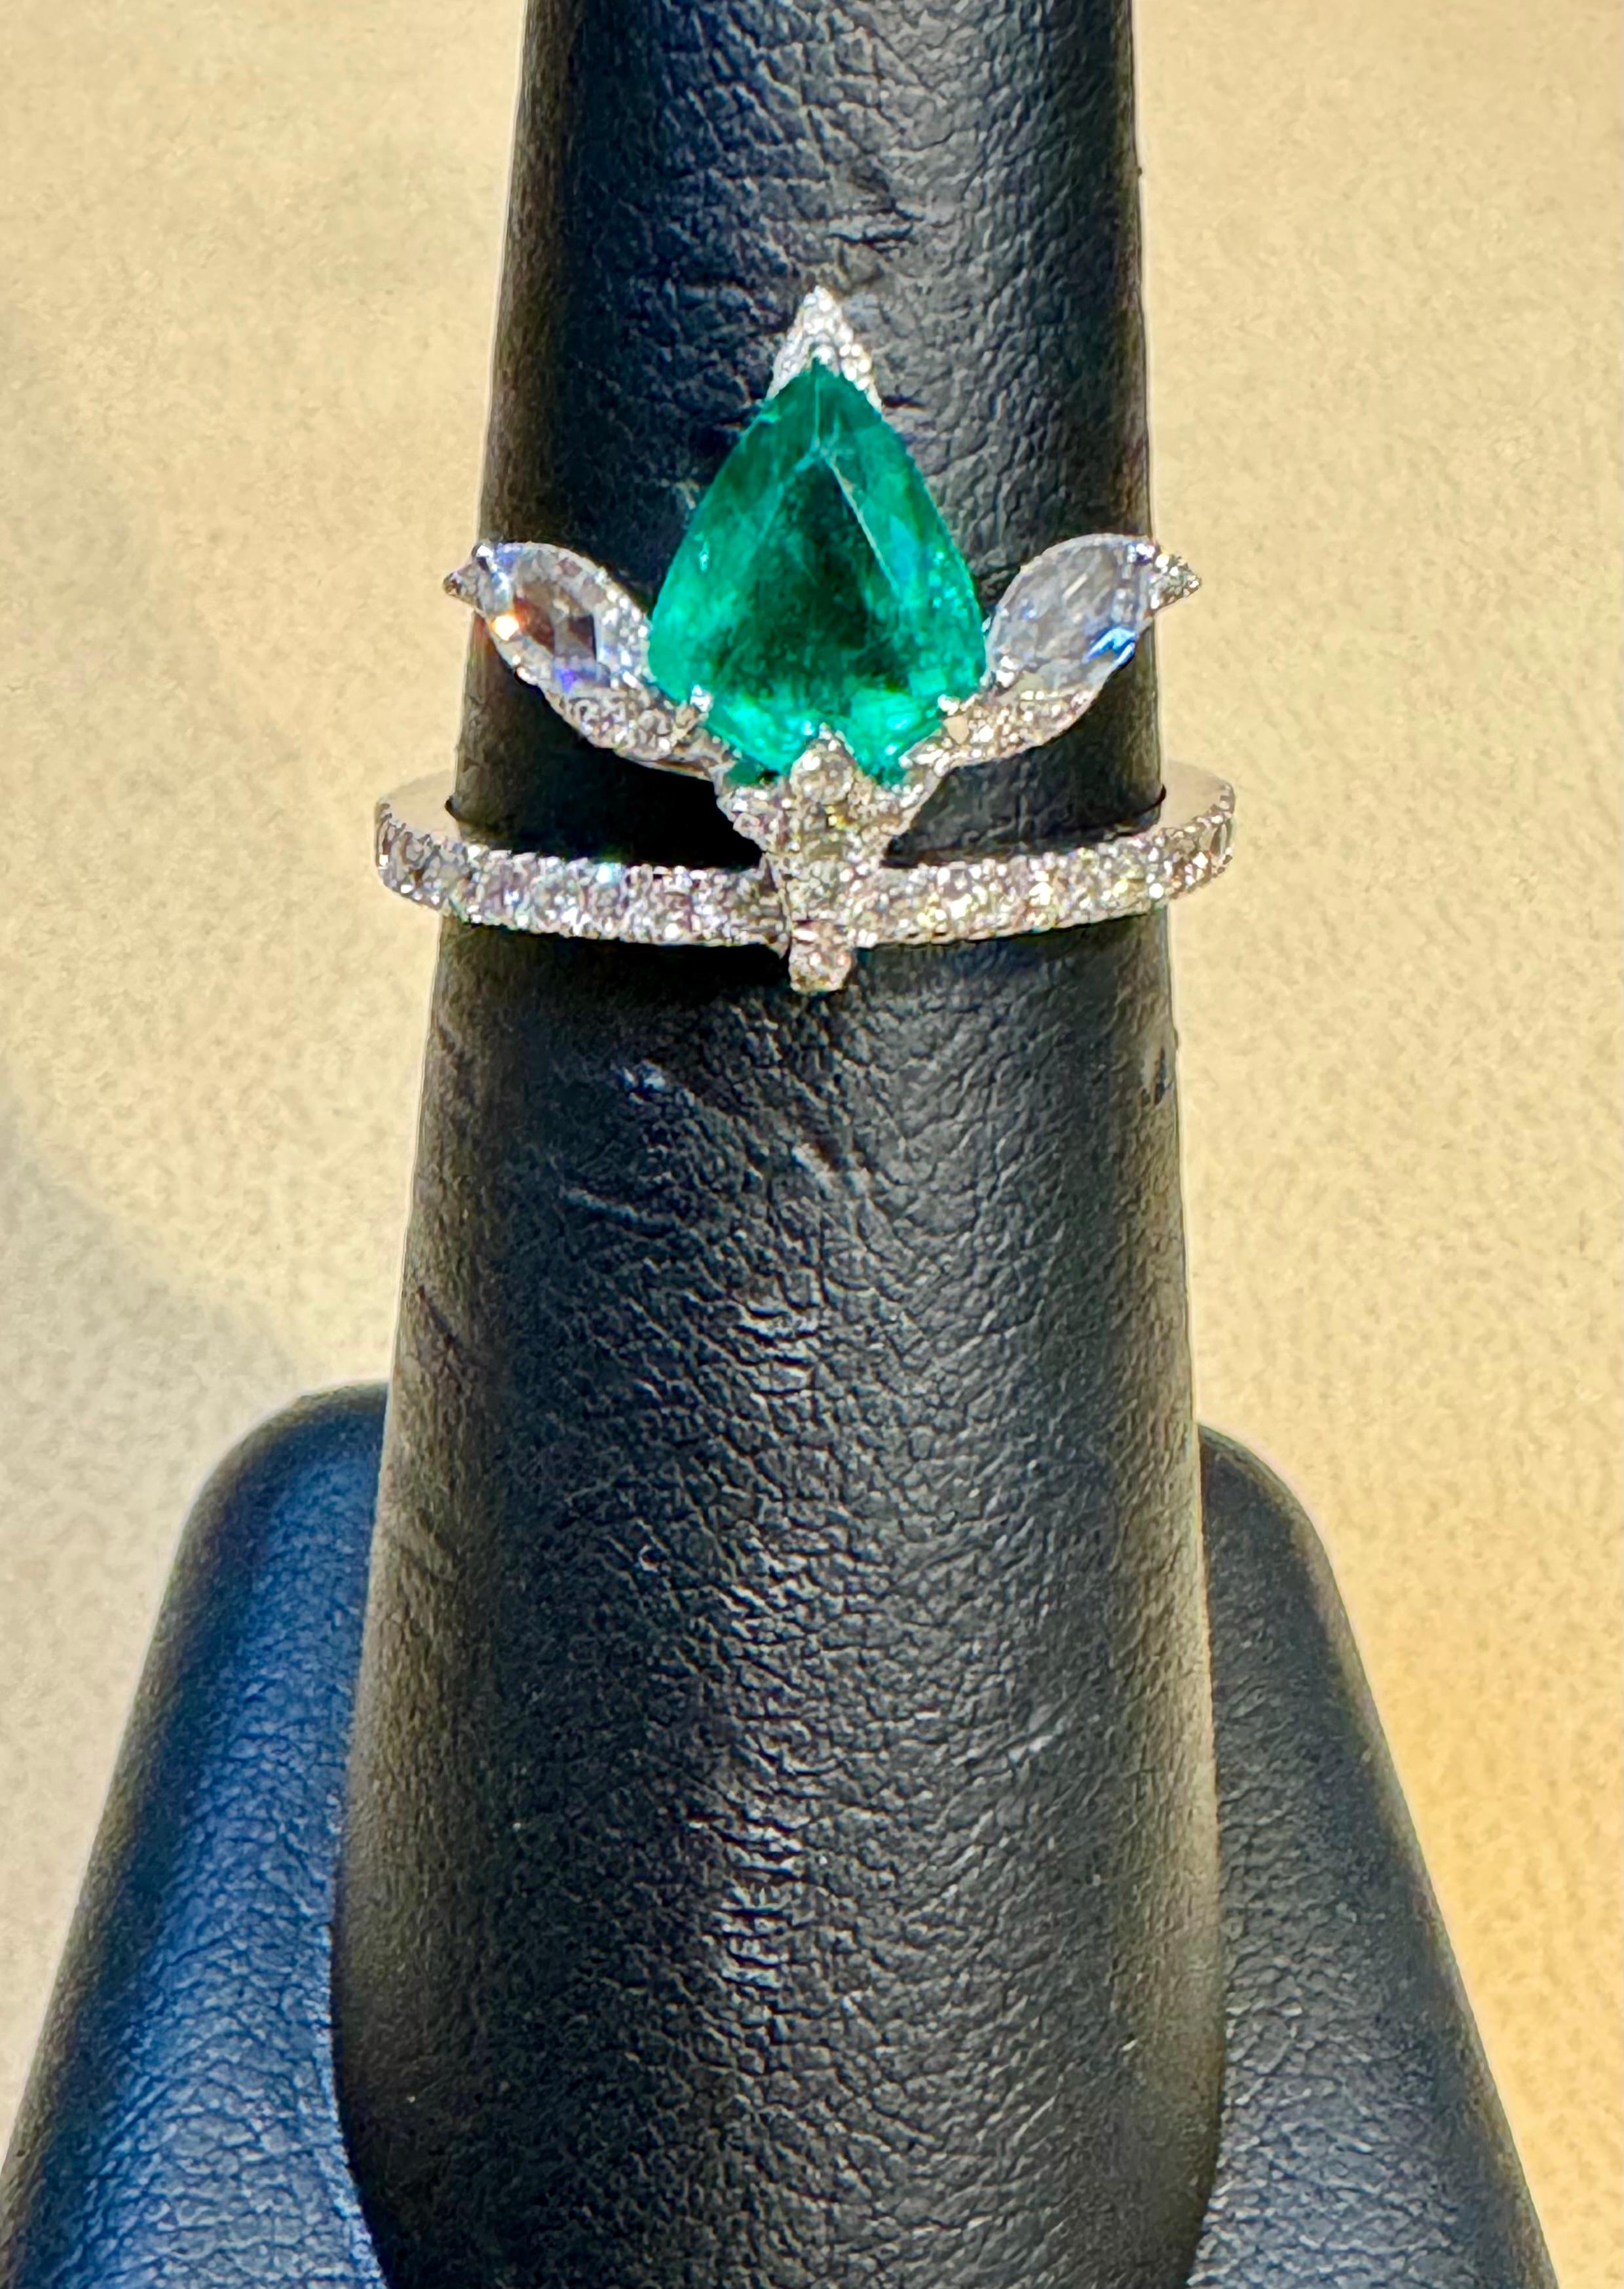 1.2 Ct Finest Zambian Pear Emerald & 1 Ct Diamond Ring in 18 Kt Gold Size 6.5 For Sale 3